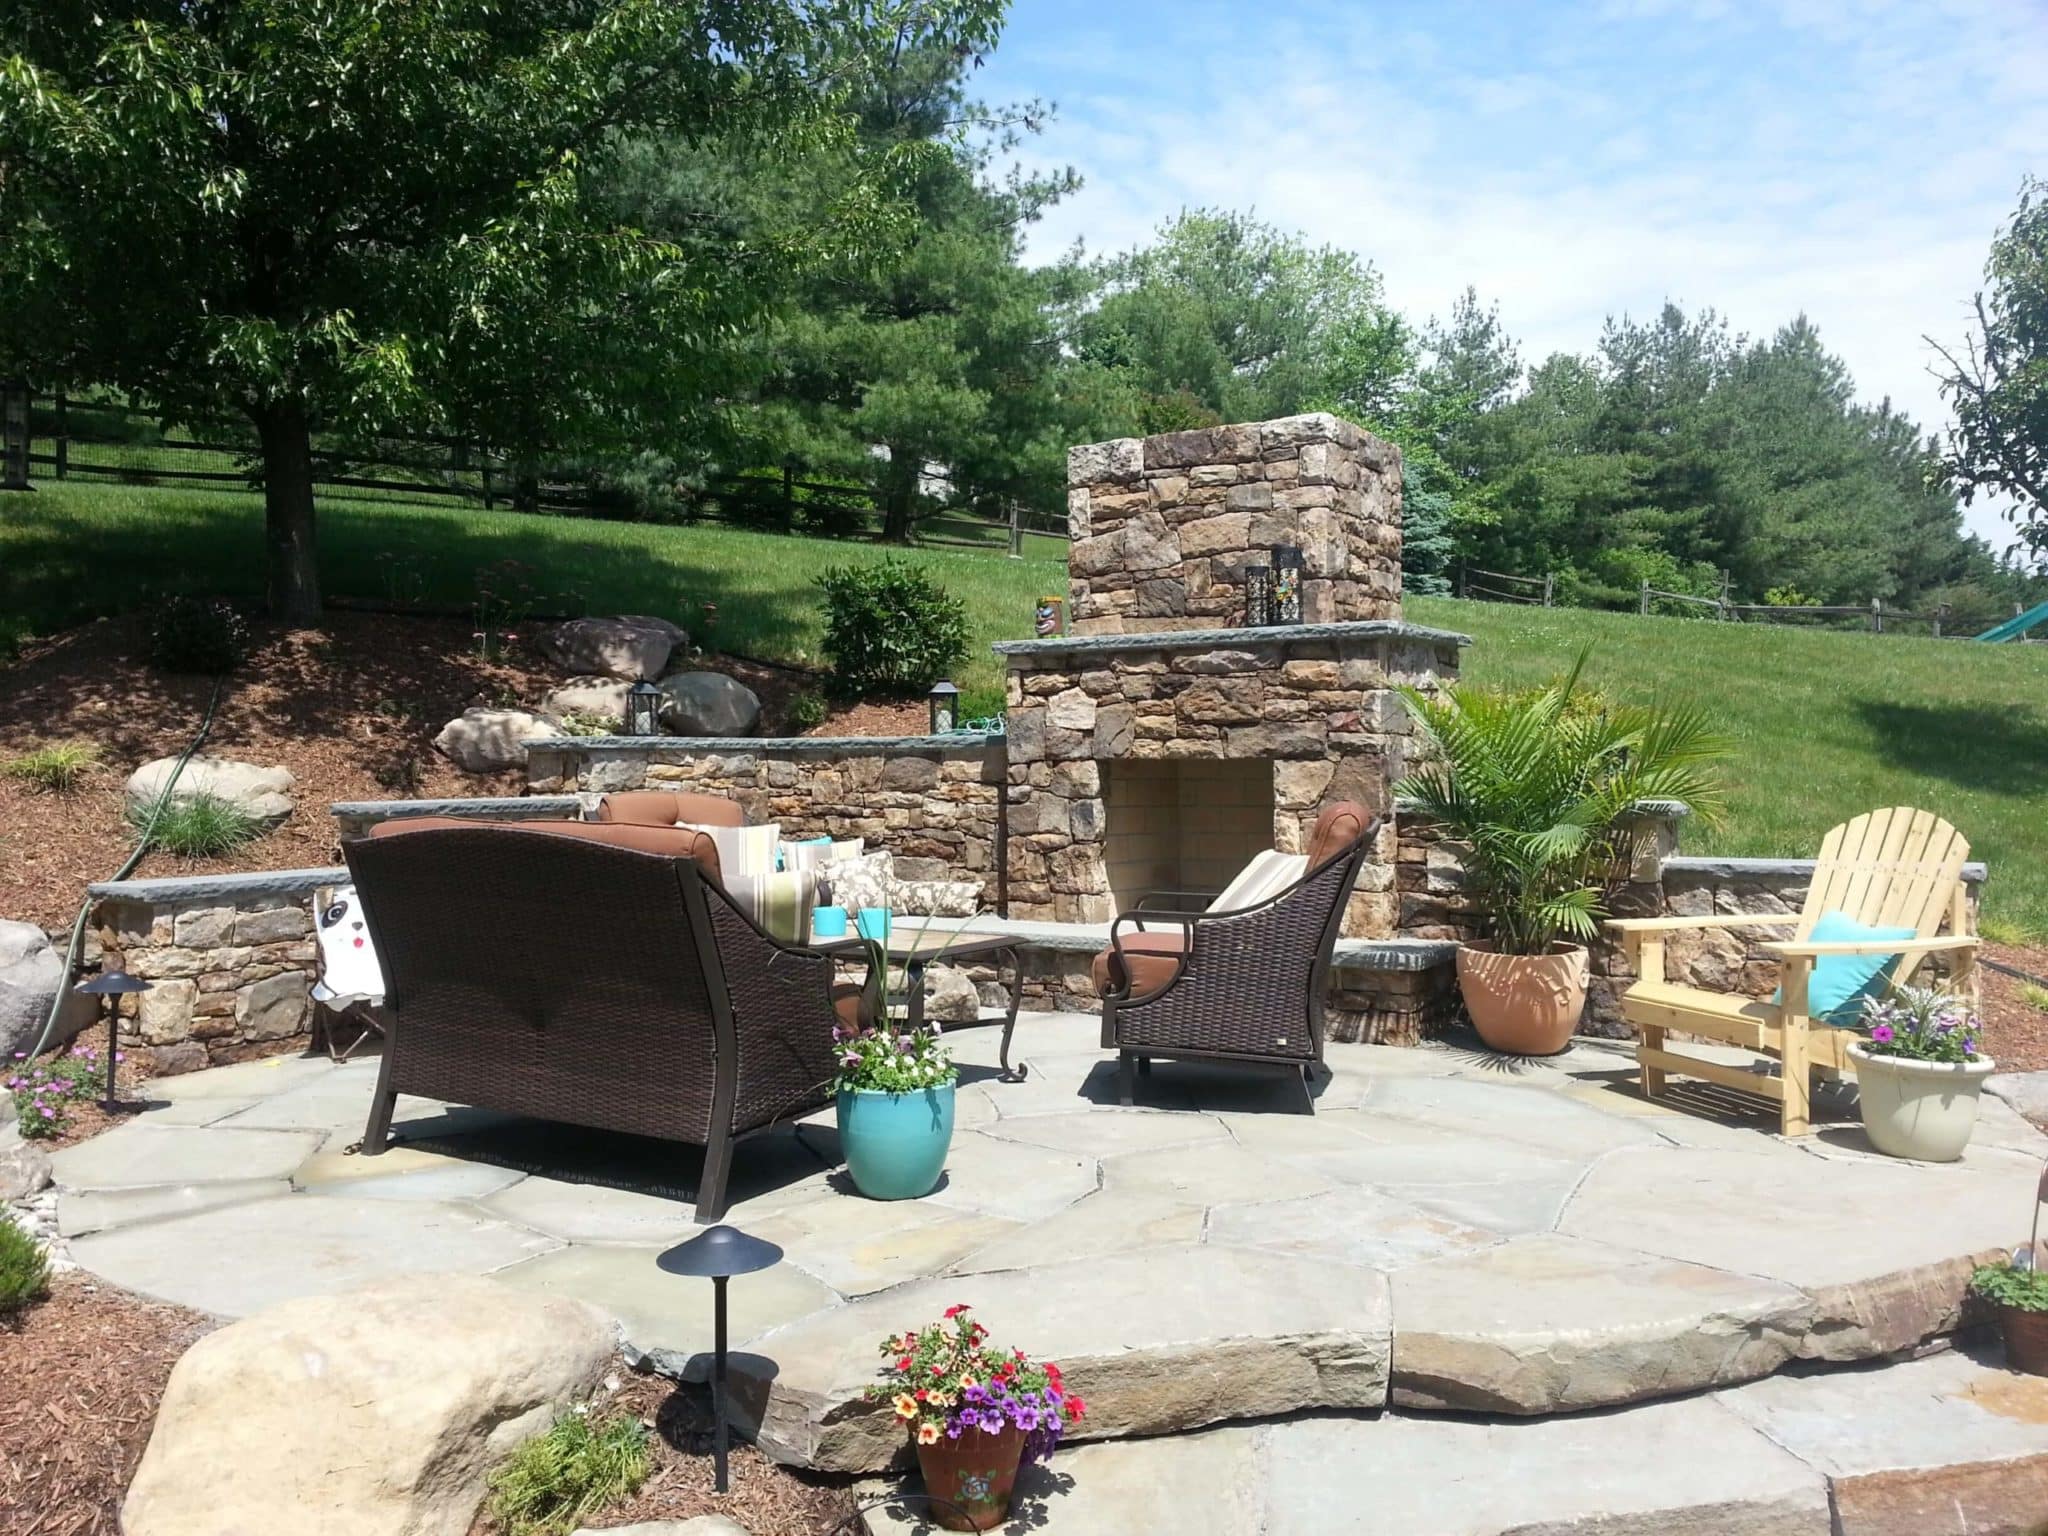 232 Flagstone Patio Built Into Hillside with Stone Fireplace and Terraced Stone Retaining Walls with Caps